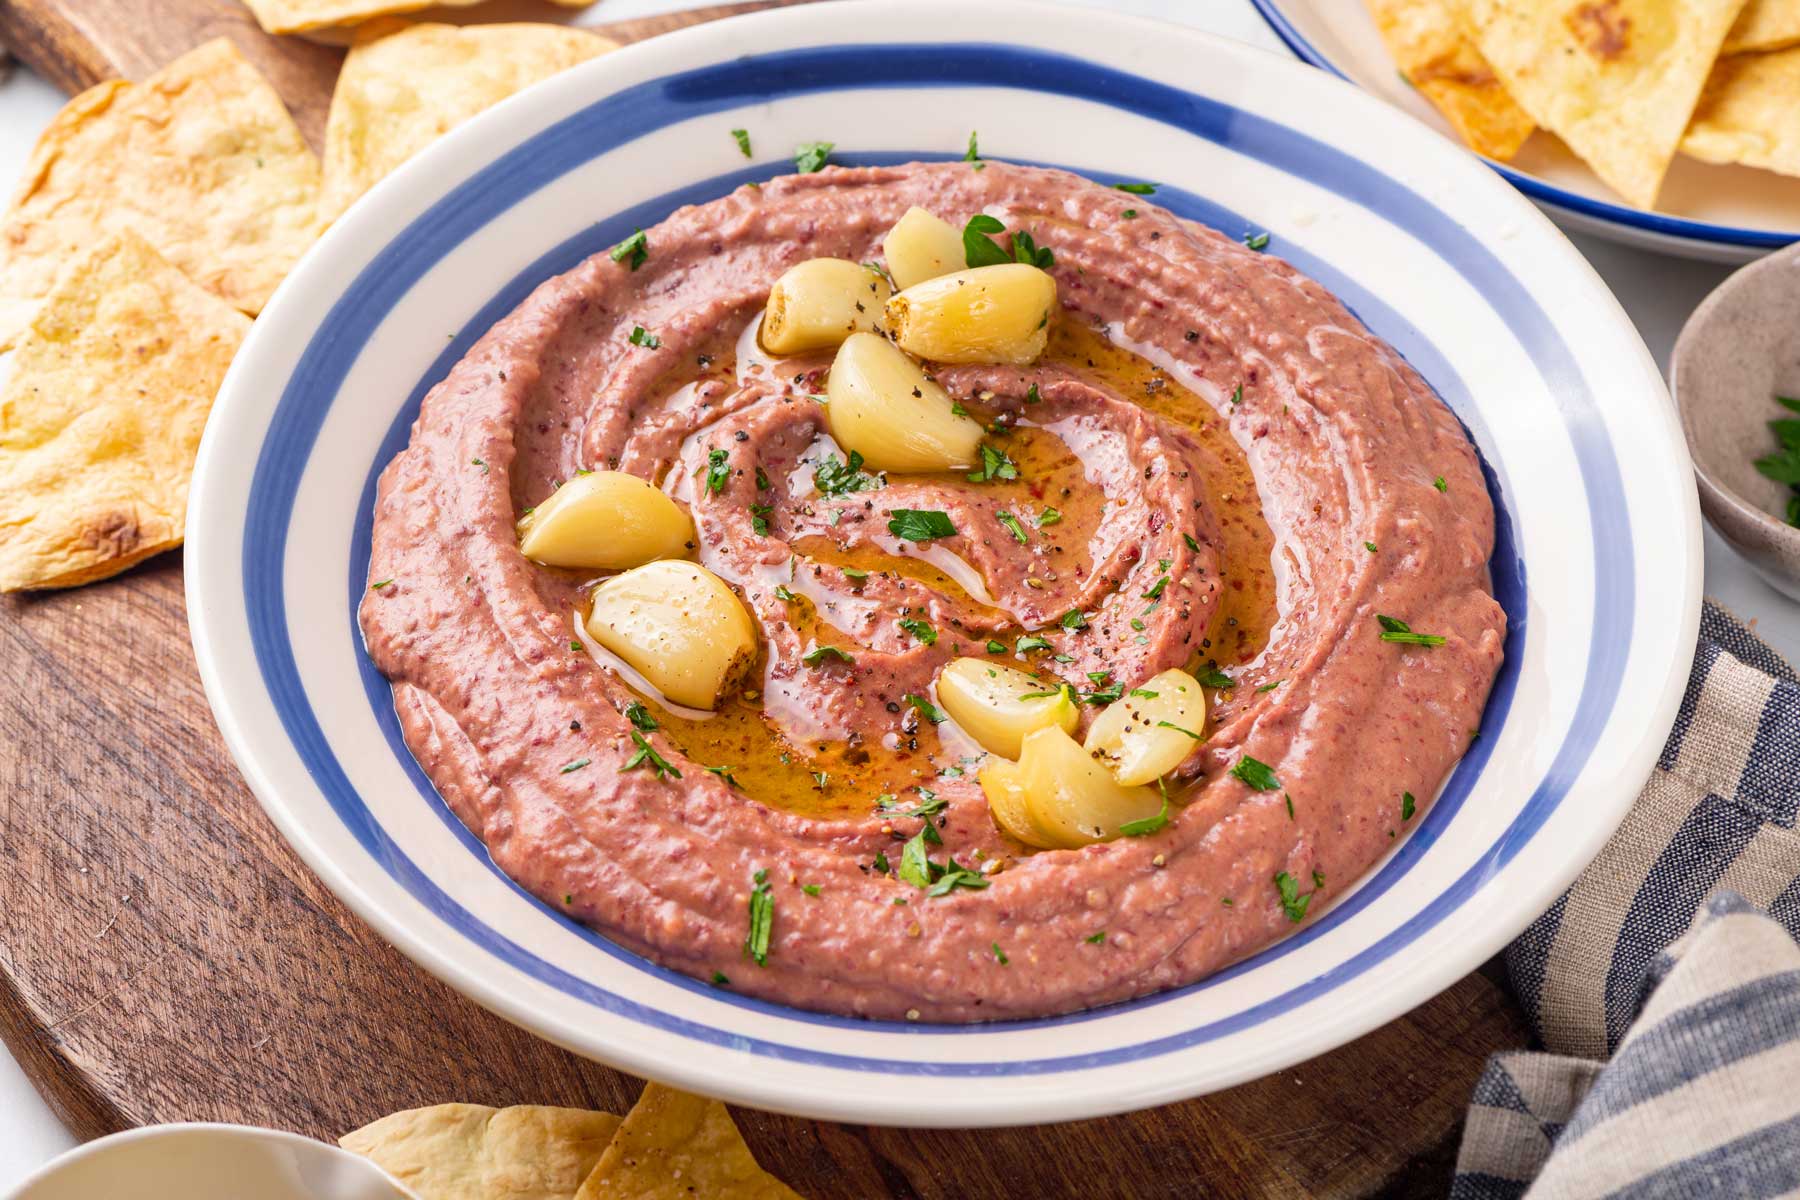 Bowl of red bean hummus with roasted garlic